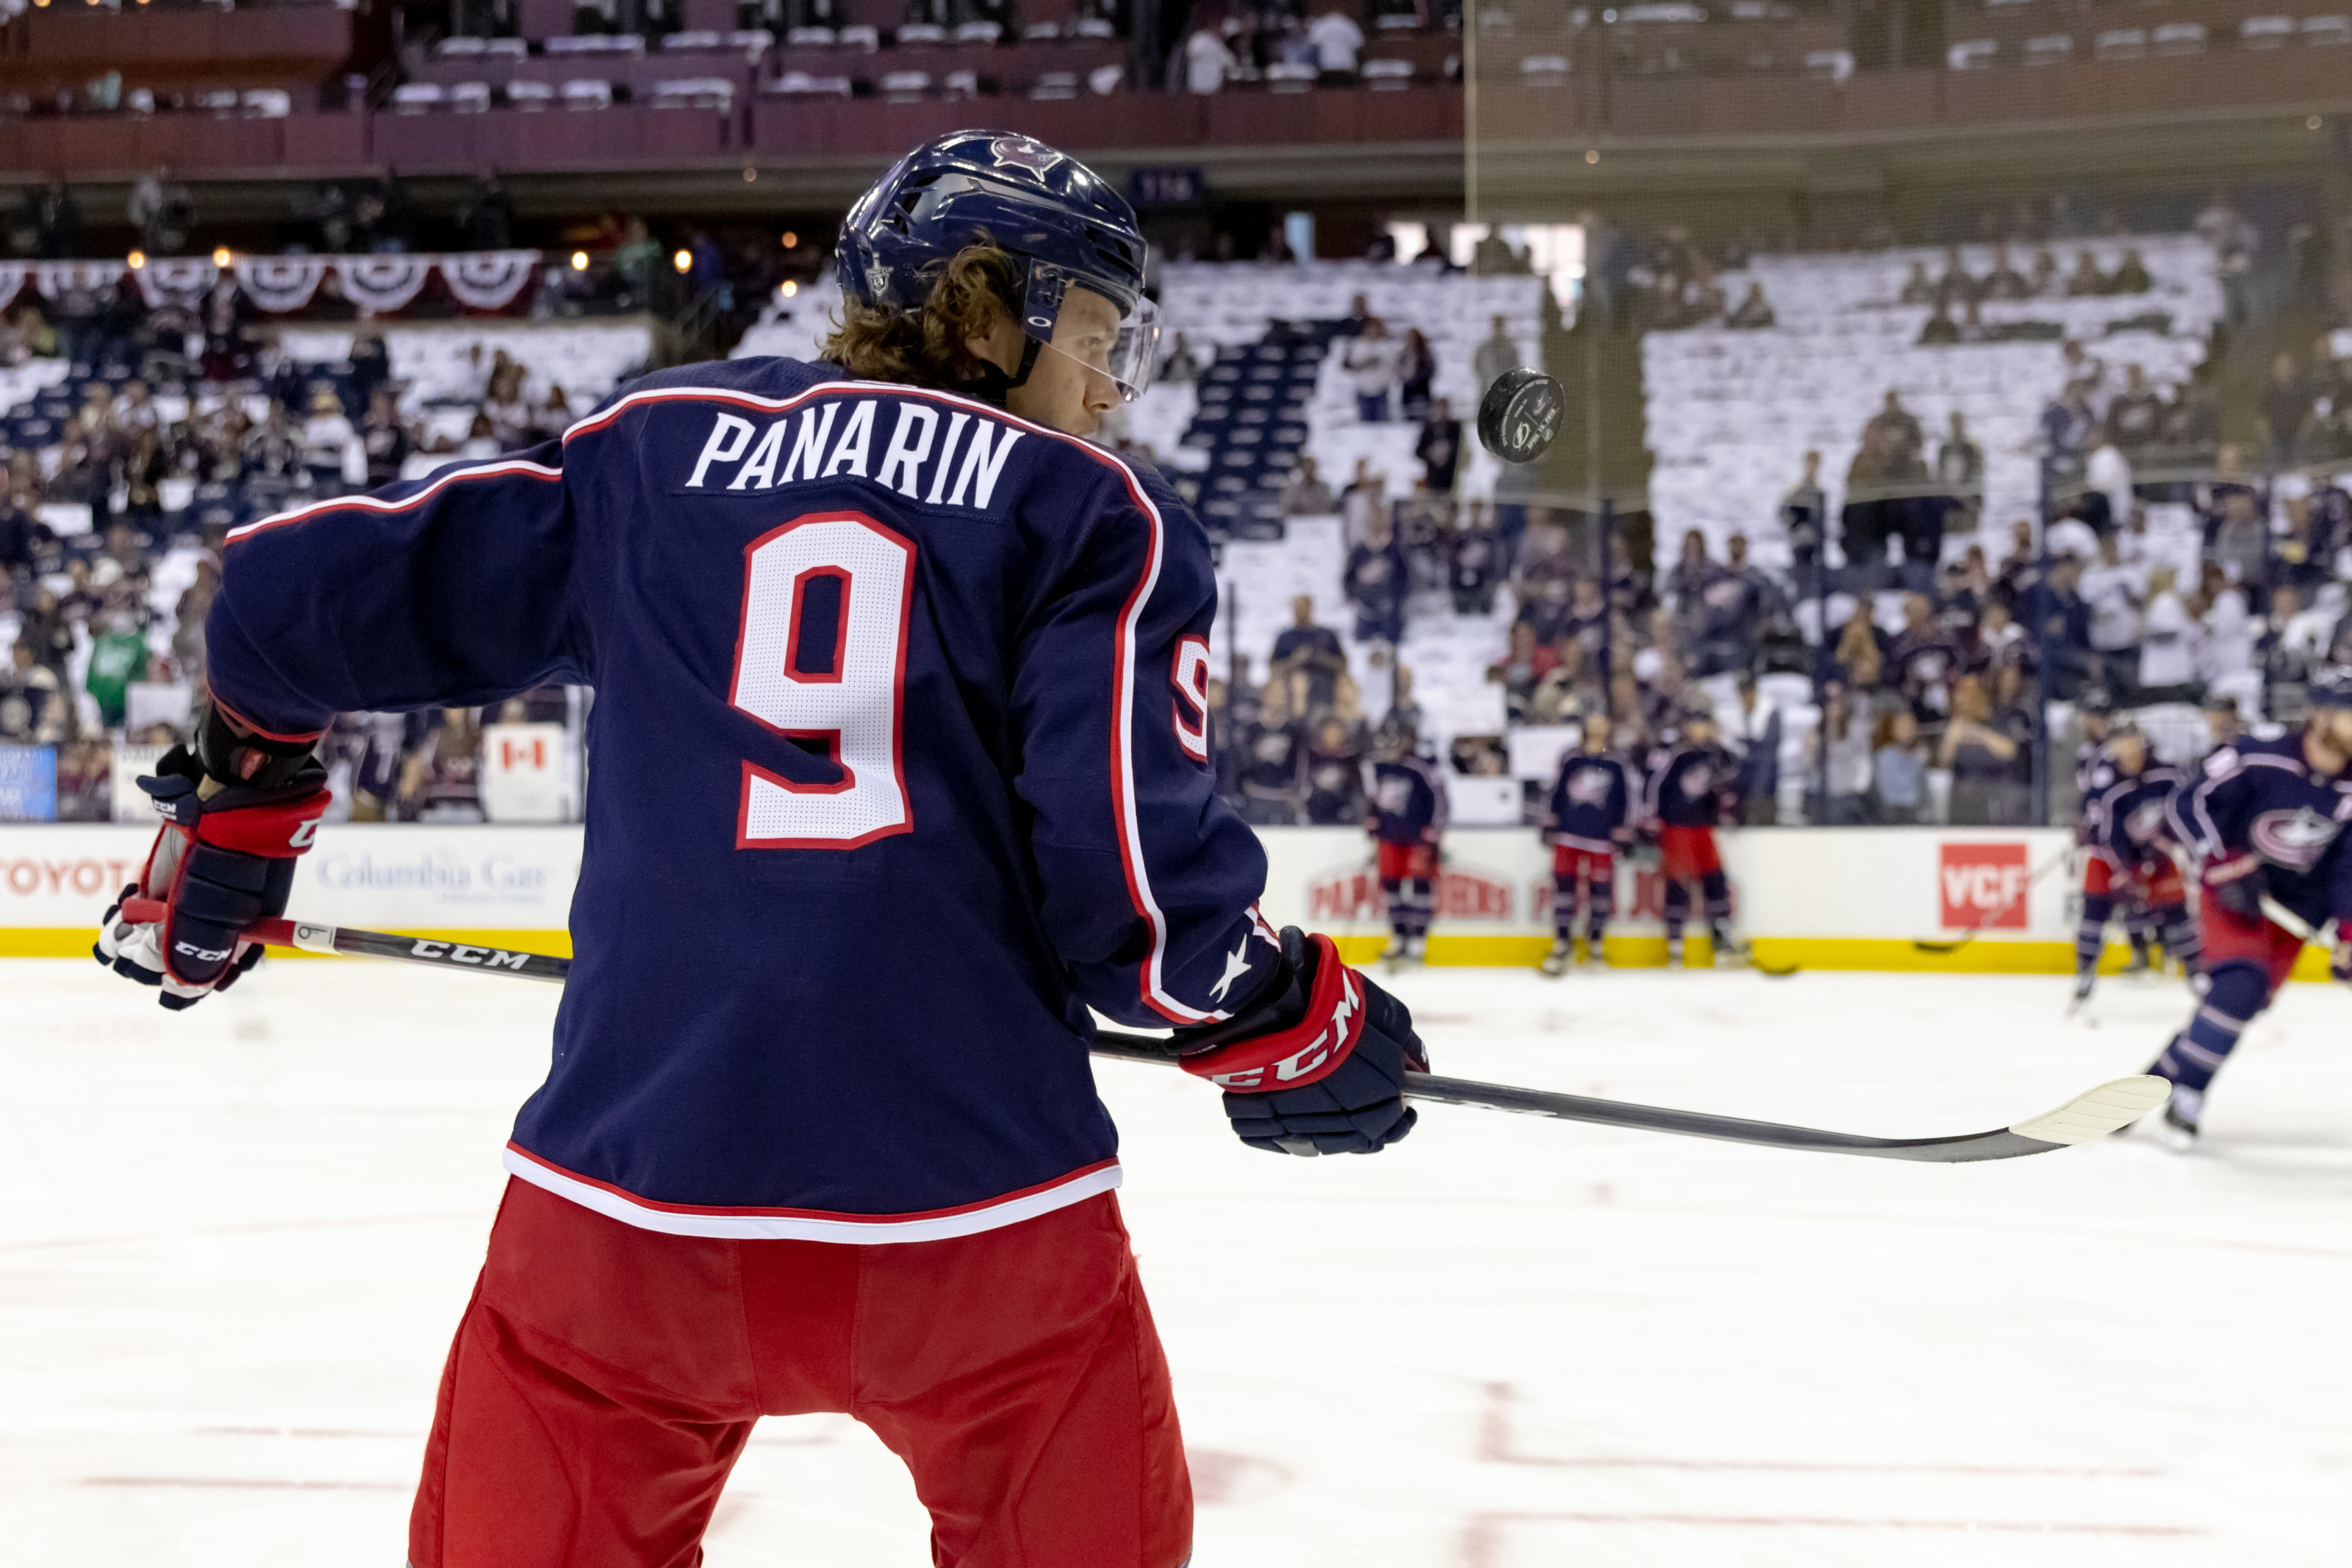 Artemi Panarin scores first goal for Columbus Blue Jackets in style